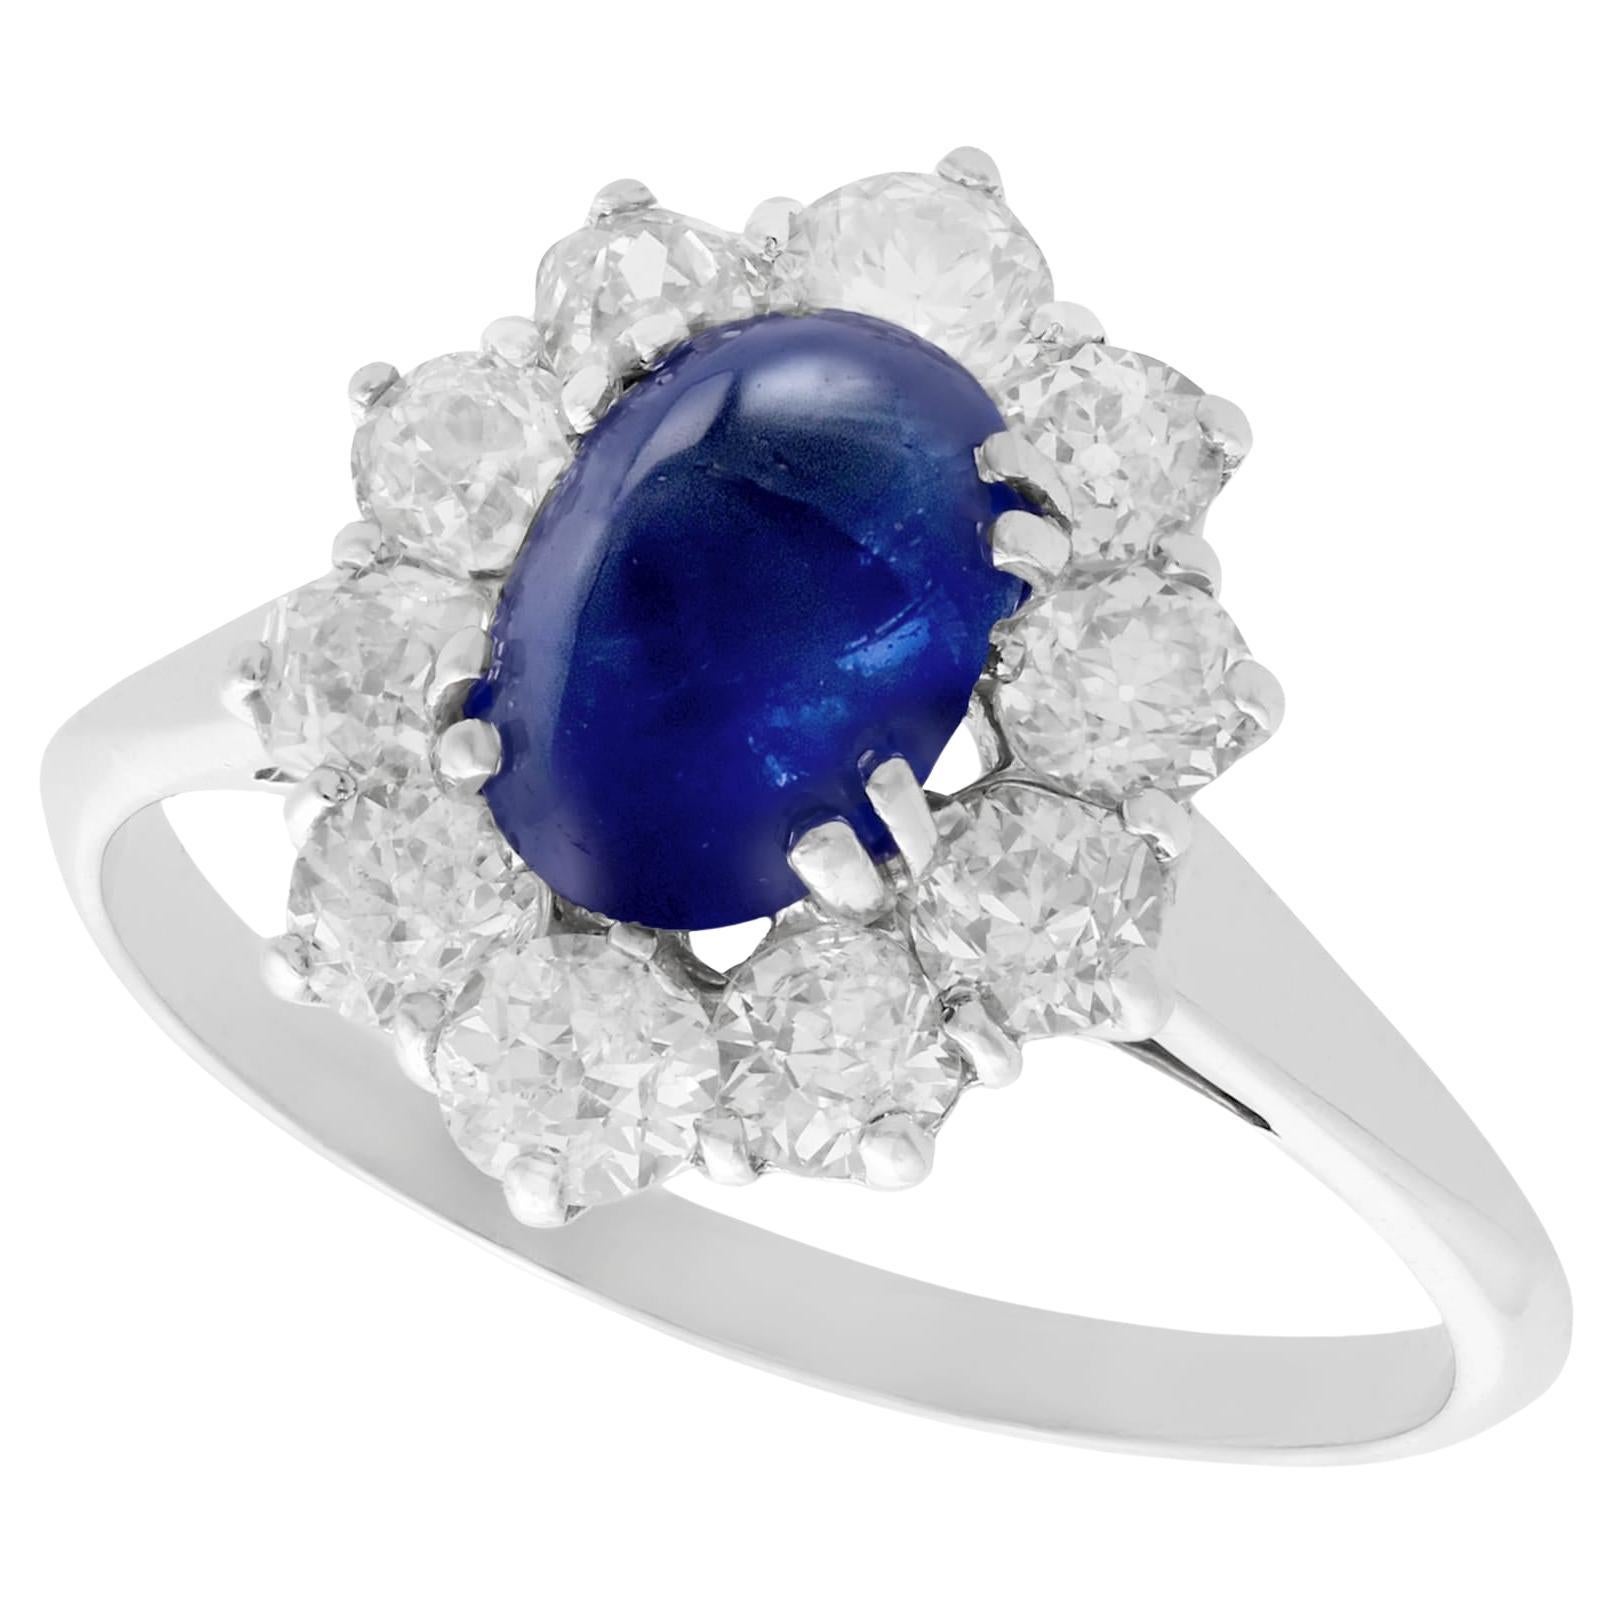 1940s 2.17 Carat Cabochon Cut Sapphire and Diamond Gold Cluster Ring For Sale